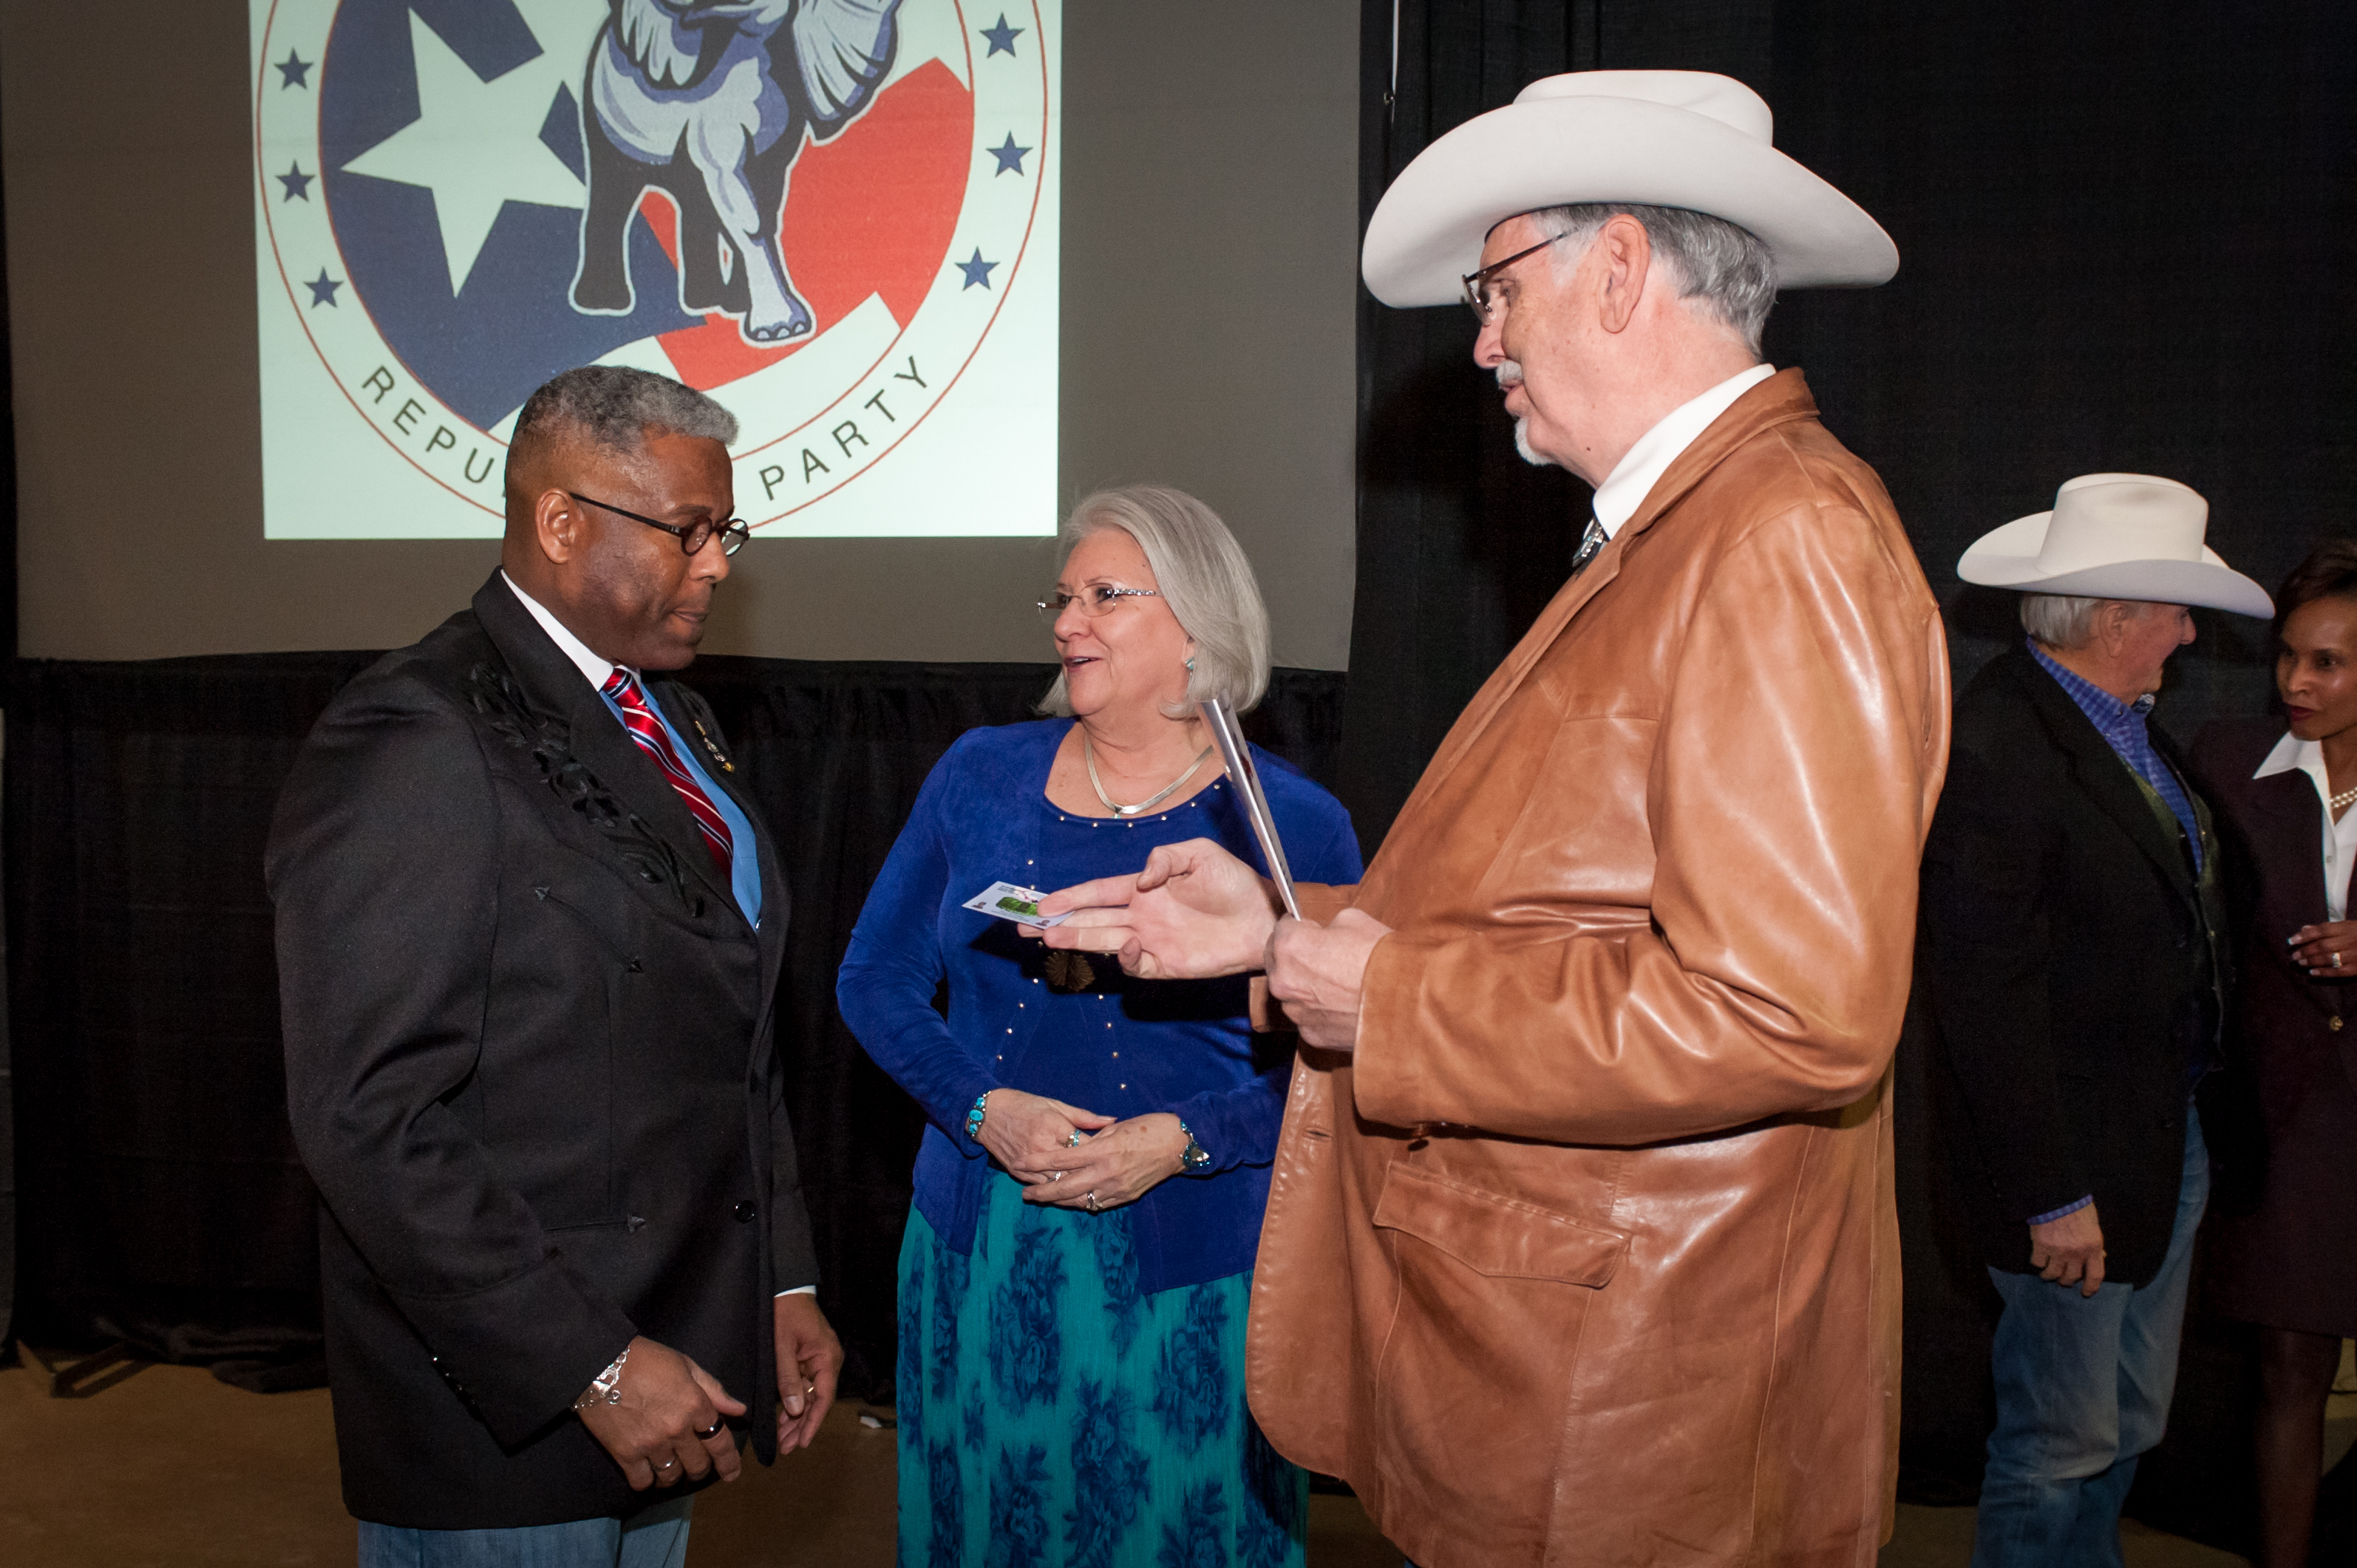 Shaie Williams for AGN Media. Lt. Colonel Allen West with Linda and Tom Hicks at the Texas Panhandle Lincoln-Reagan Day Dinner hosted by the local Republican party groups held at The Rex Baxter Building in Amarillo, TX on January 29, 2016